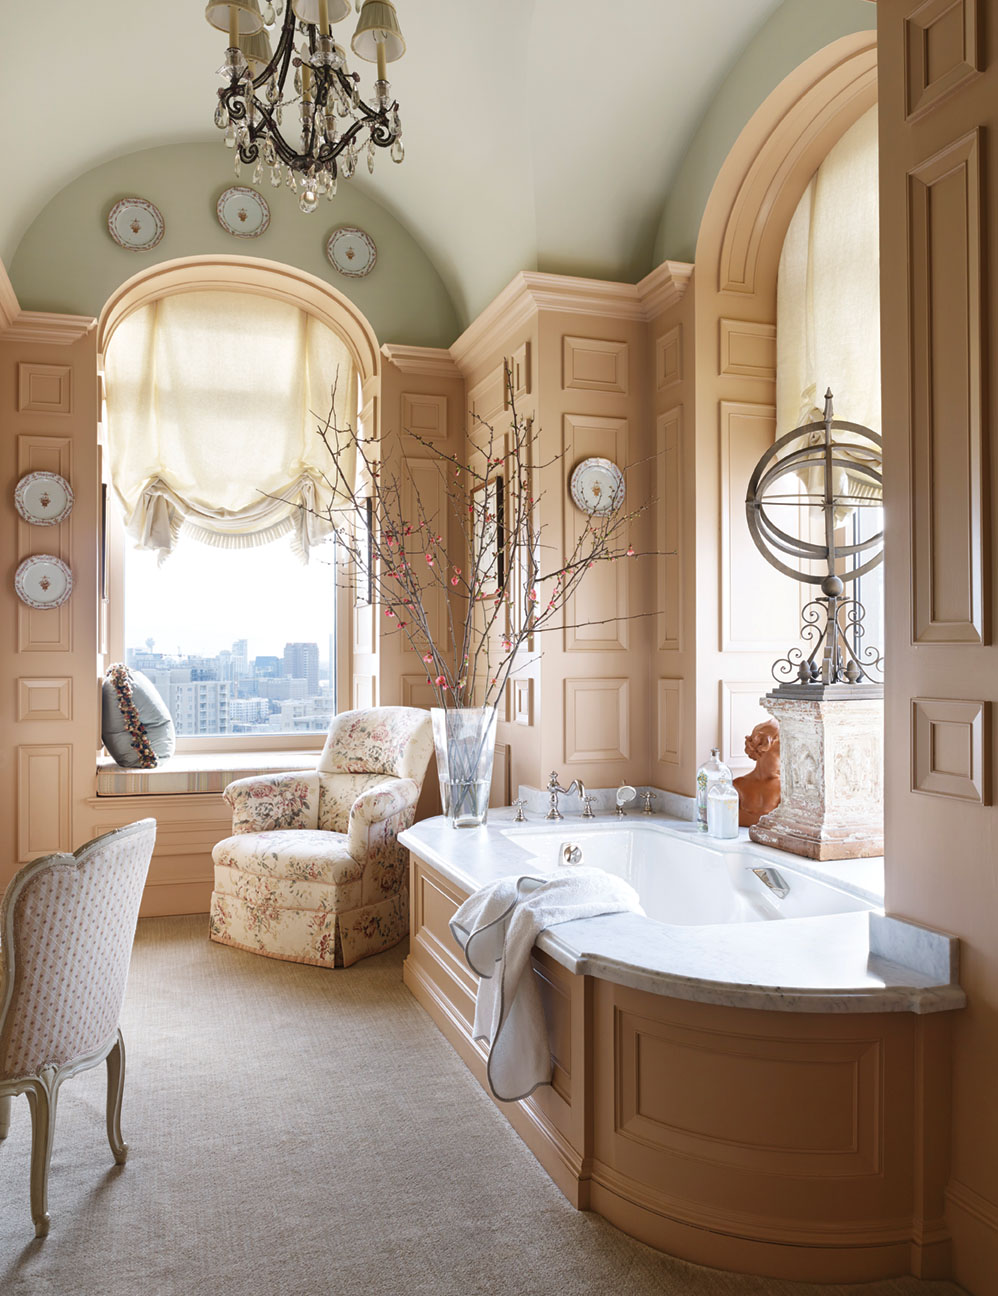 Other luxury bathroom decor shown hear includes a crystal chandelier, a cushioned window seat, tall arched windows and ceilings, and comfortable chairs.